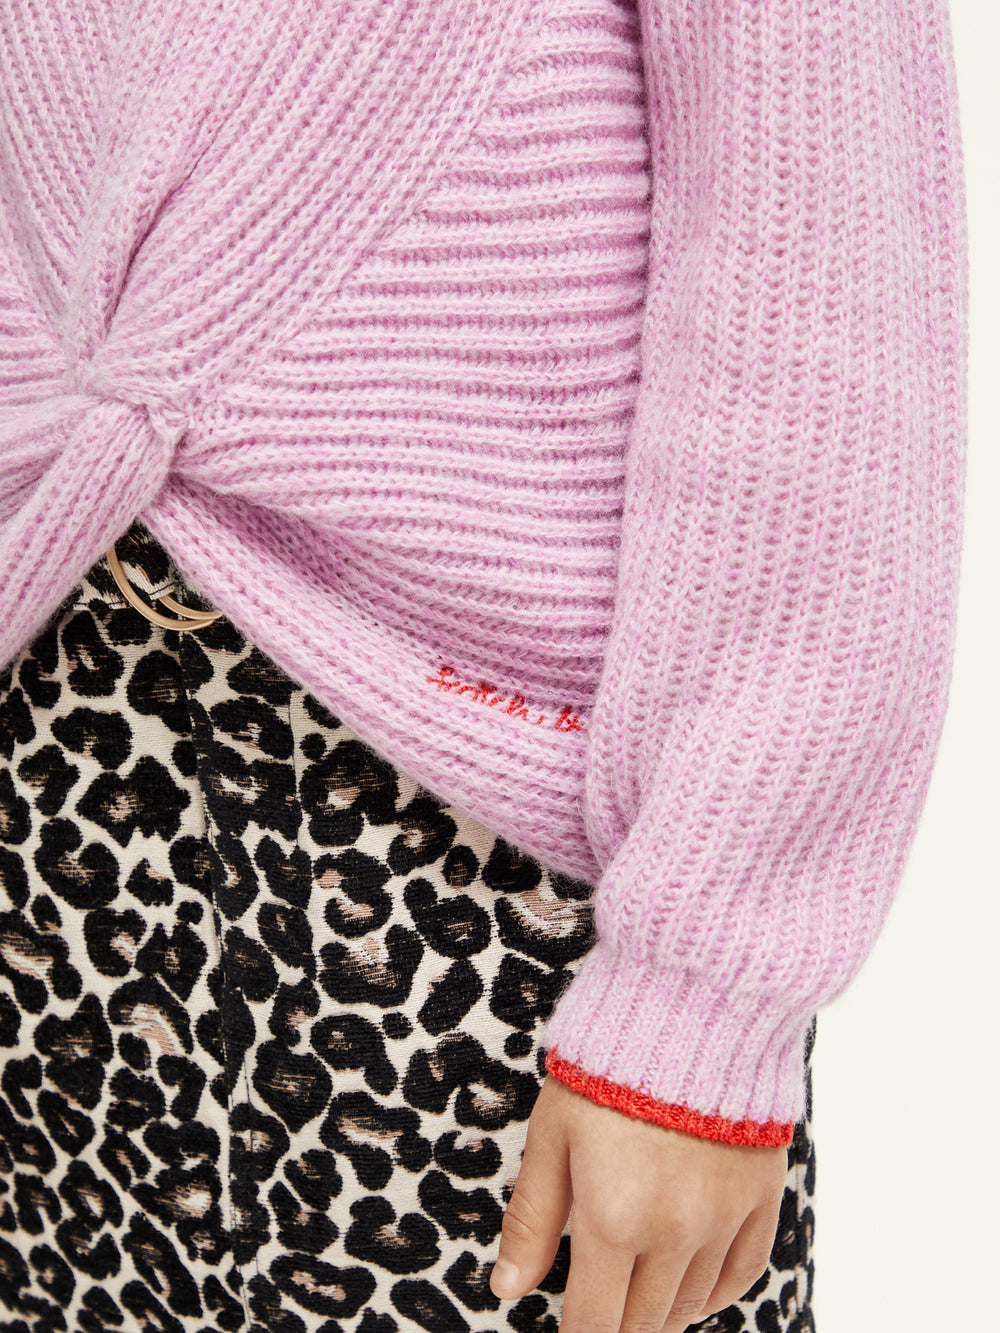 Kids - Relaxed-fit knotted sweater - Scotch & Soda NZ